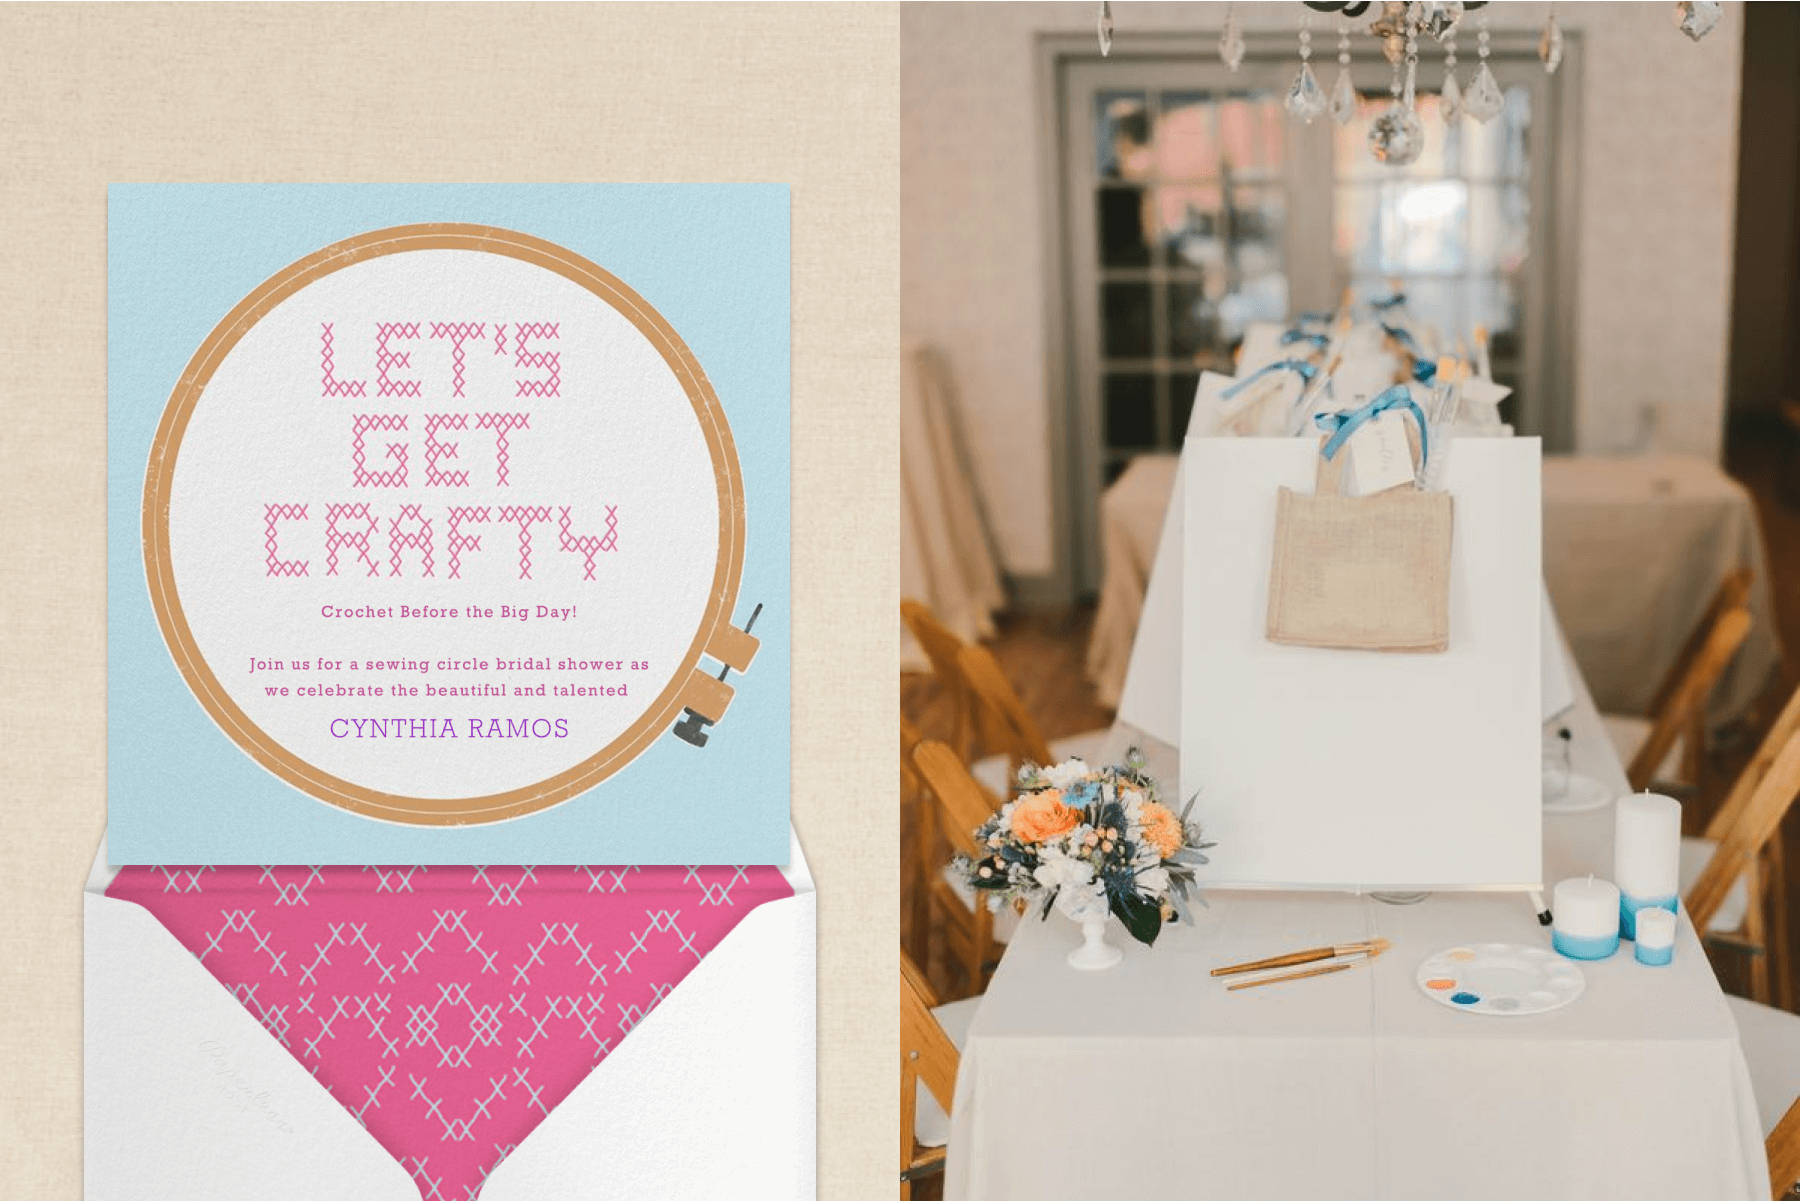 A square card with an embroidery hoop reads ‘let’s get crafty,’ several large white gift bags on a table with flowers and watercolor paints.